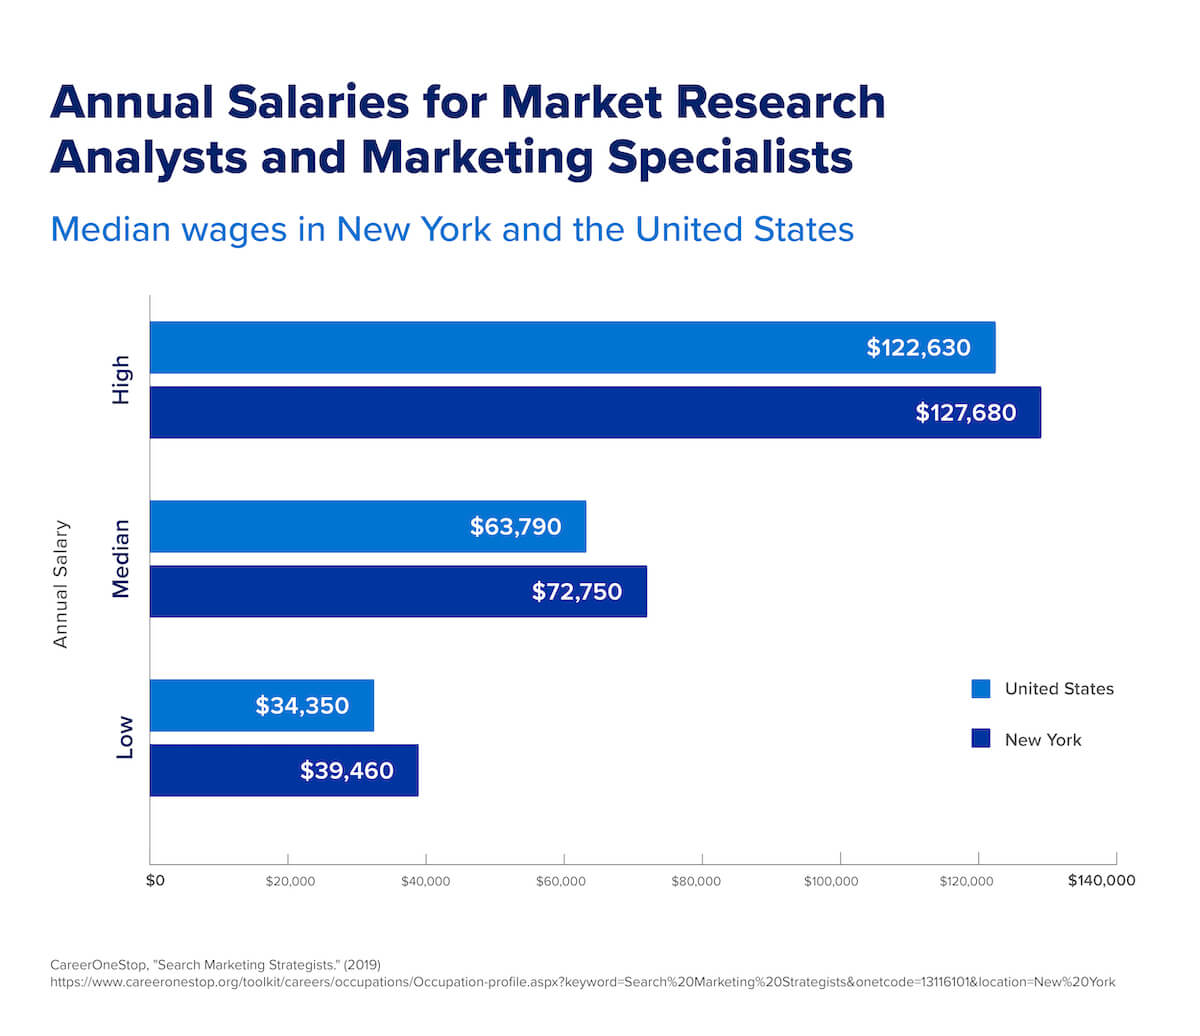 A chart that shows the median salaries for market research analysts and marketing specialists in both New York and the United States.